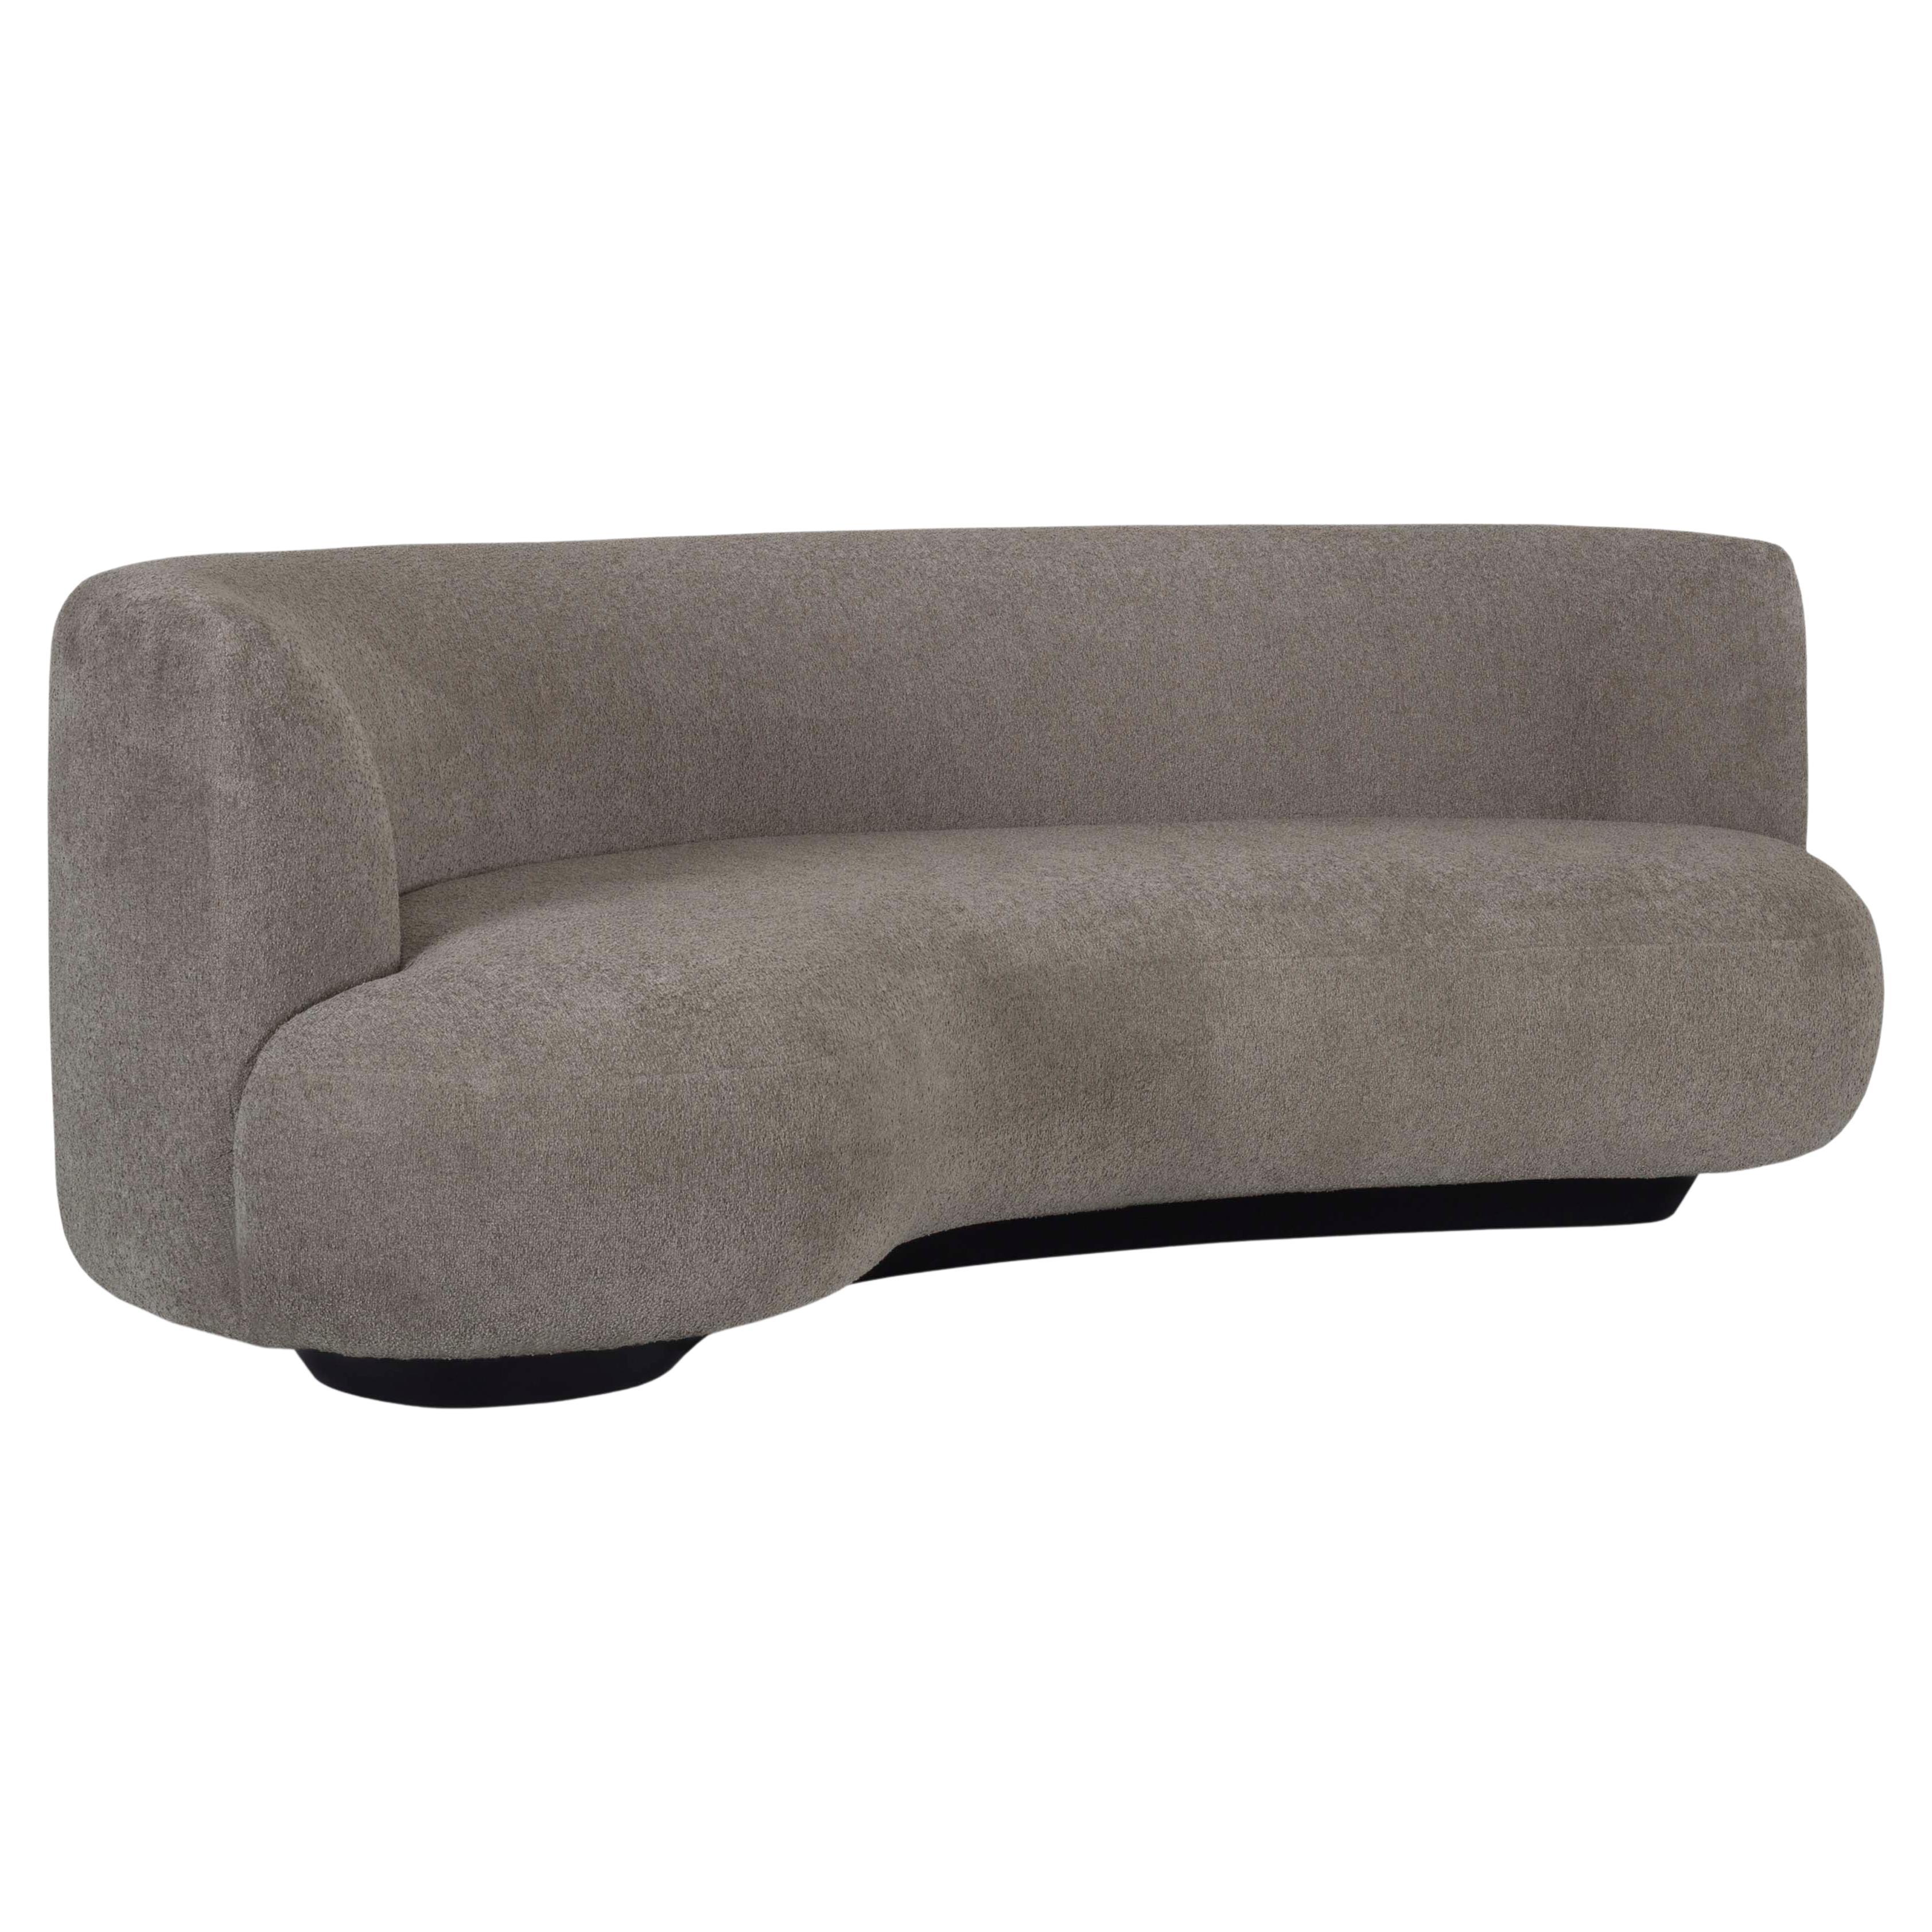 grey linen fabric couch